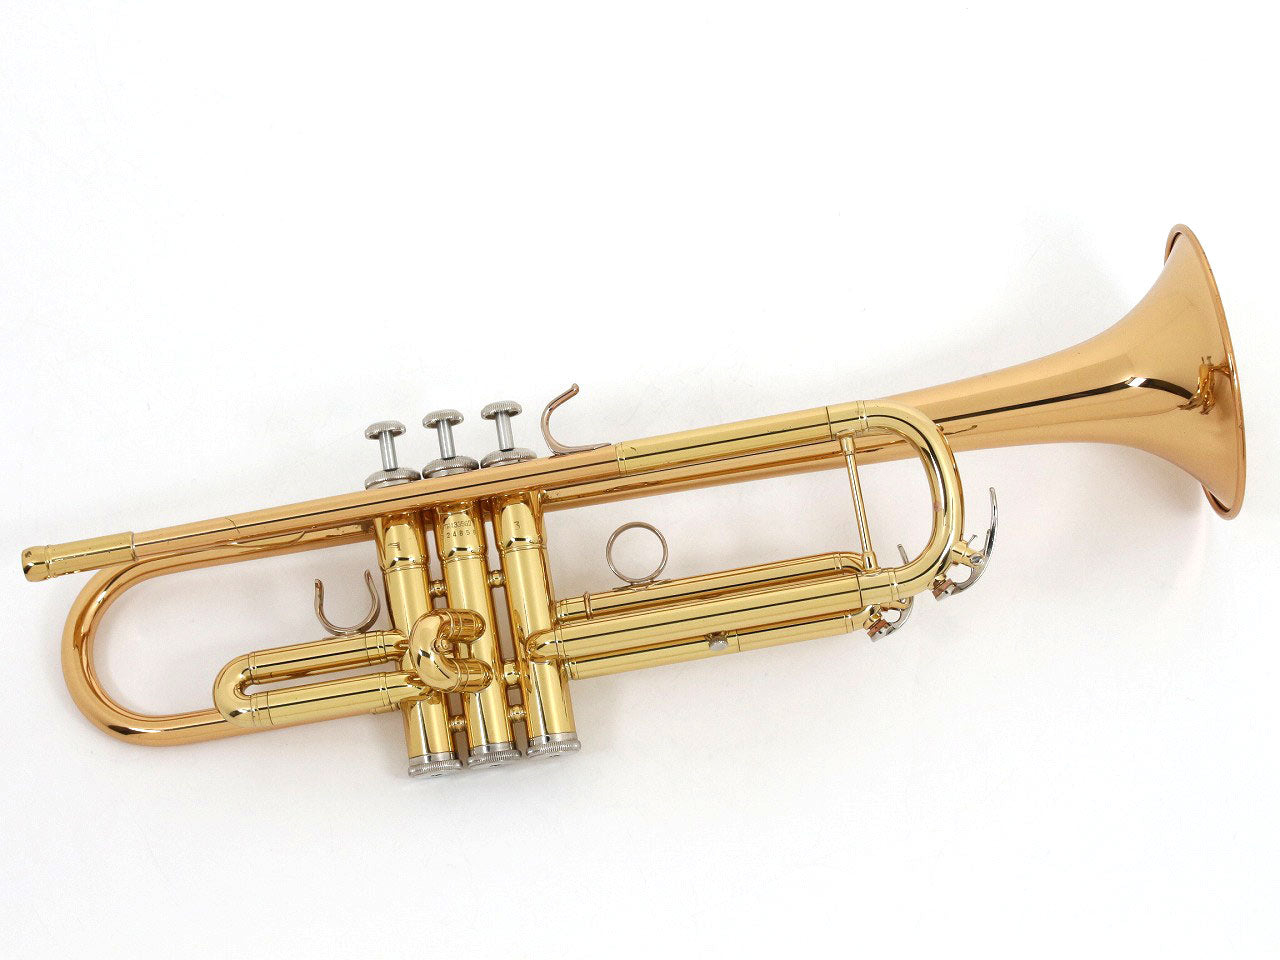 [SN D24856] USED YAMAHA / Trumpet YTR-4335GII Made in Japan [09]